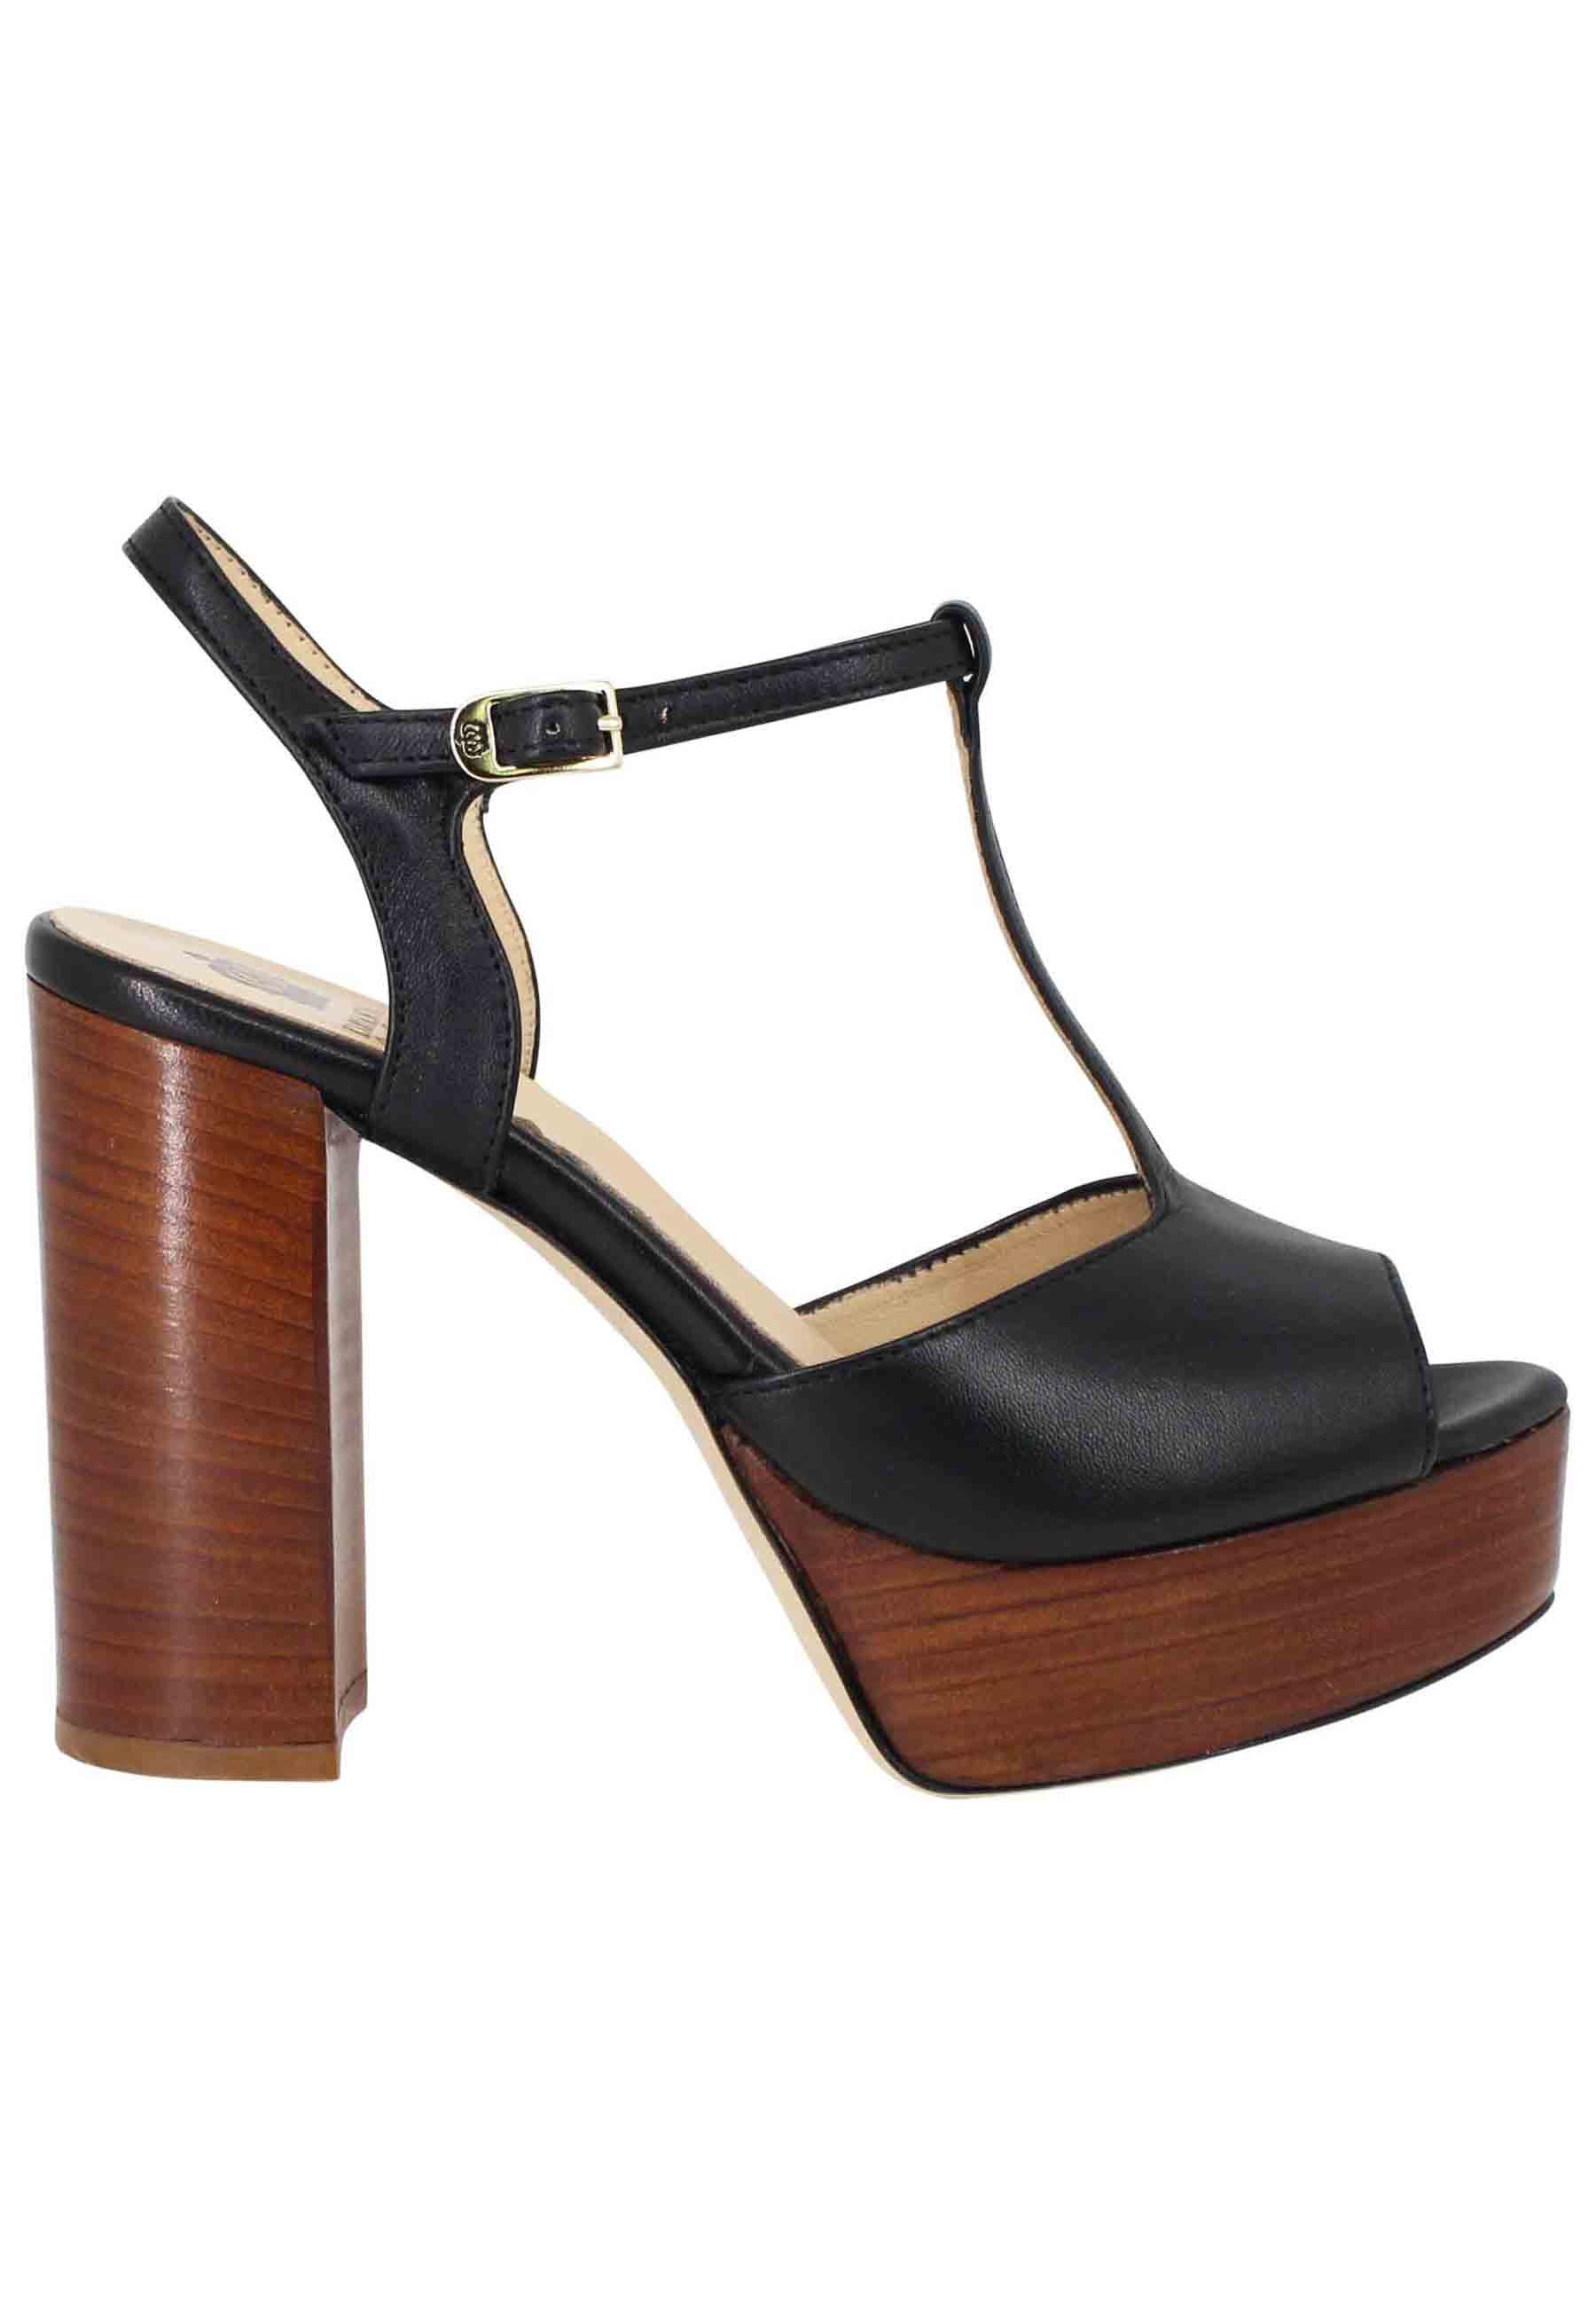 Women's black leather sandals with high heel strap and platform